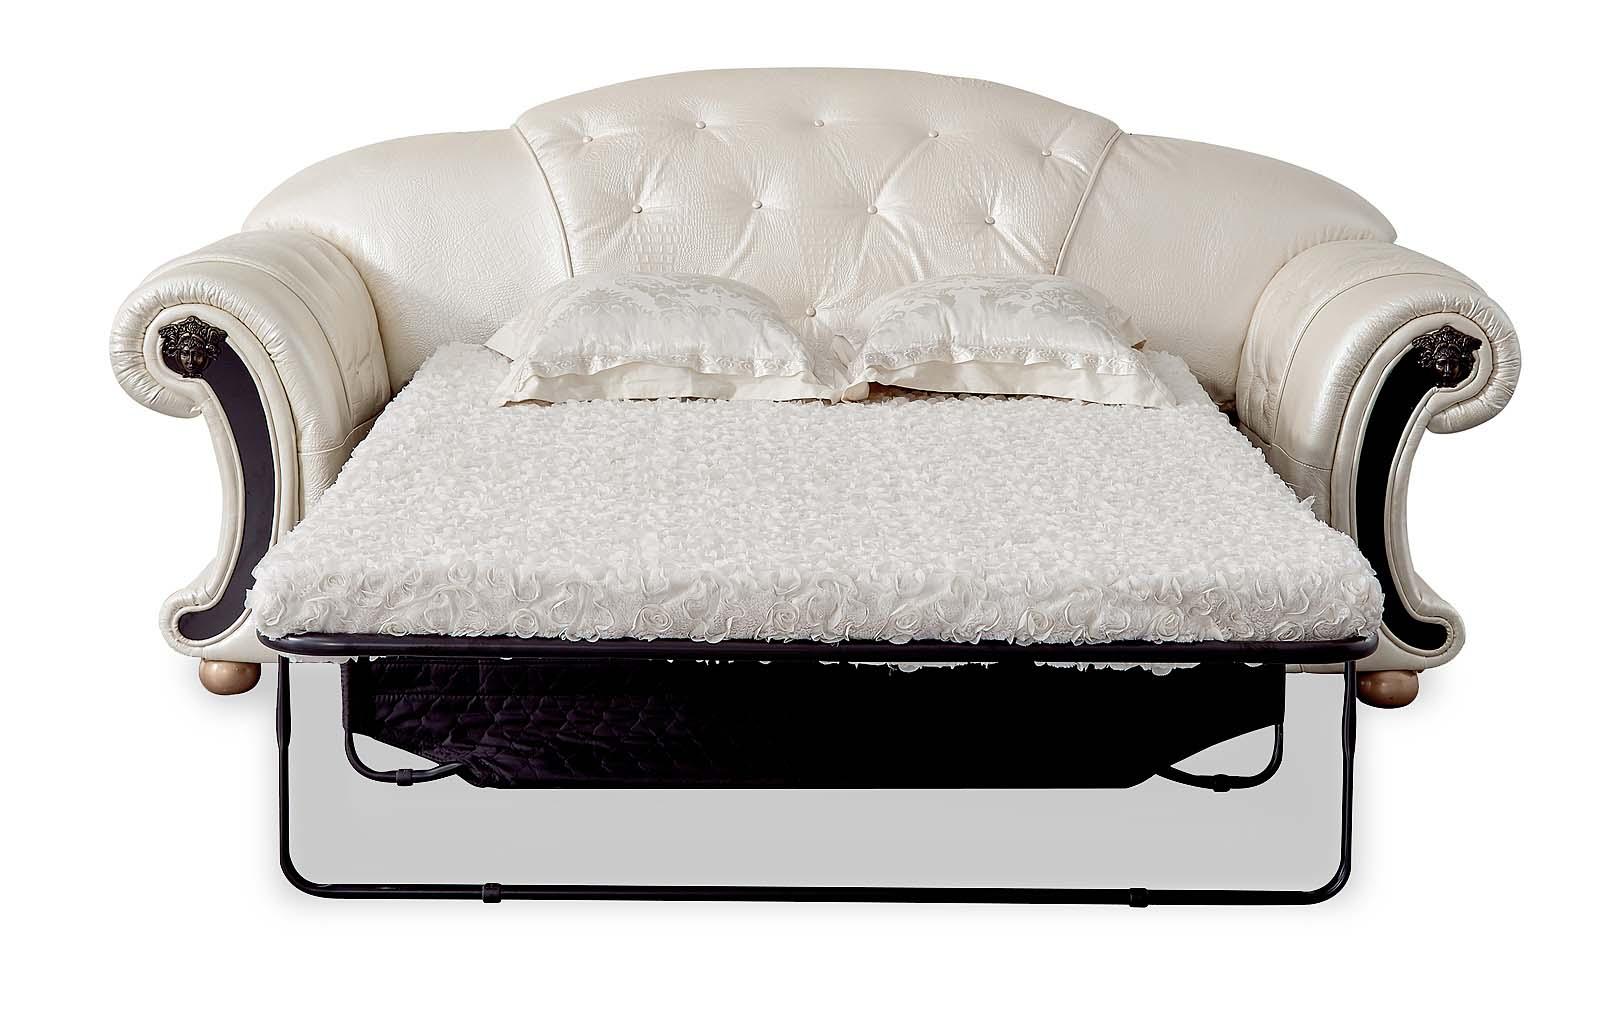 

    
Luca Home LH2007-PRL-SB Sofa bed White LH2007-PRL-Sofa Bed
